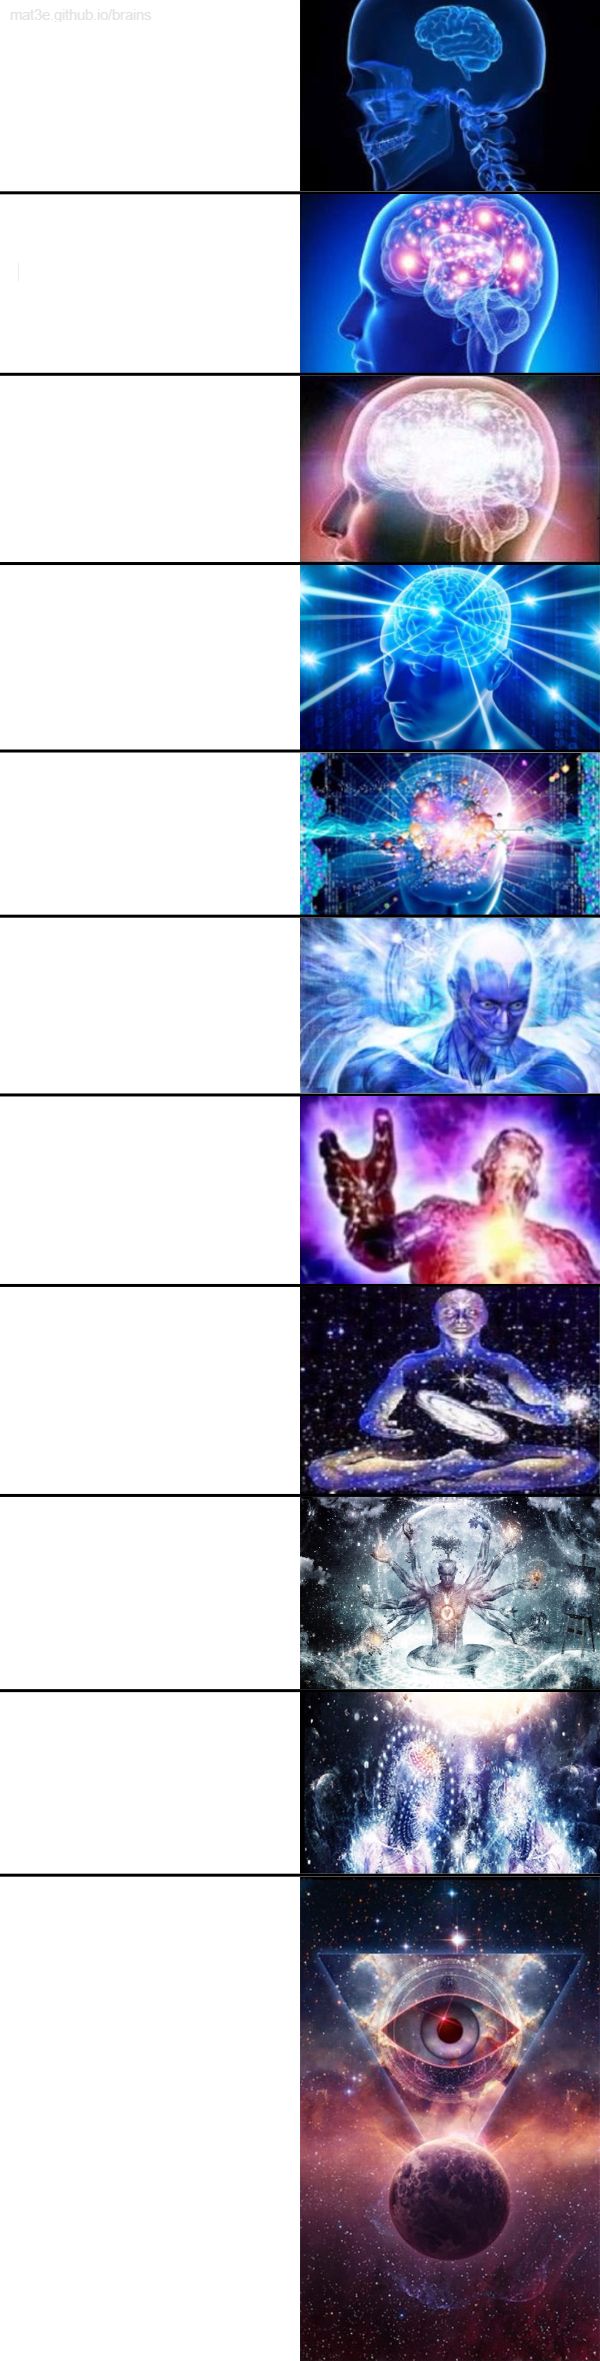 Expanding Brain Meme template used by pro-PPC meme group.